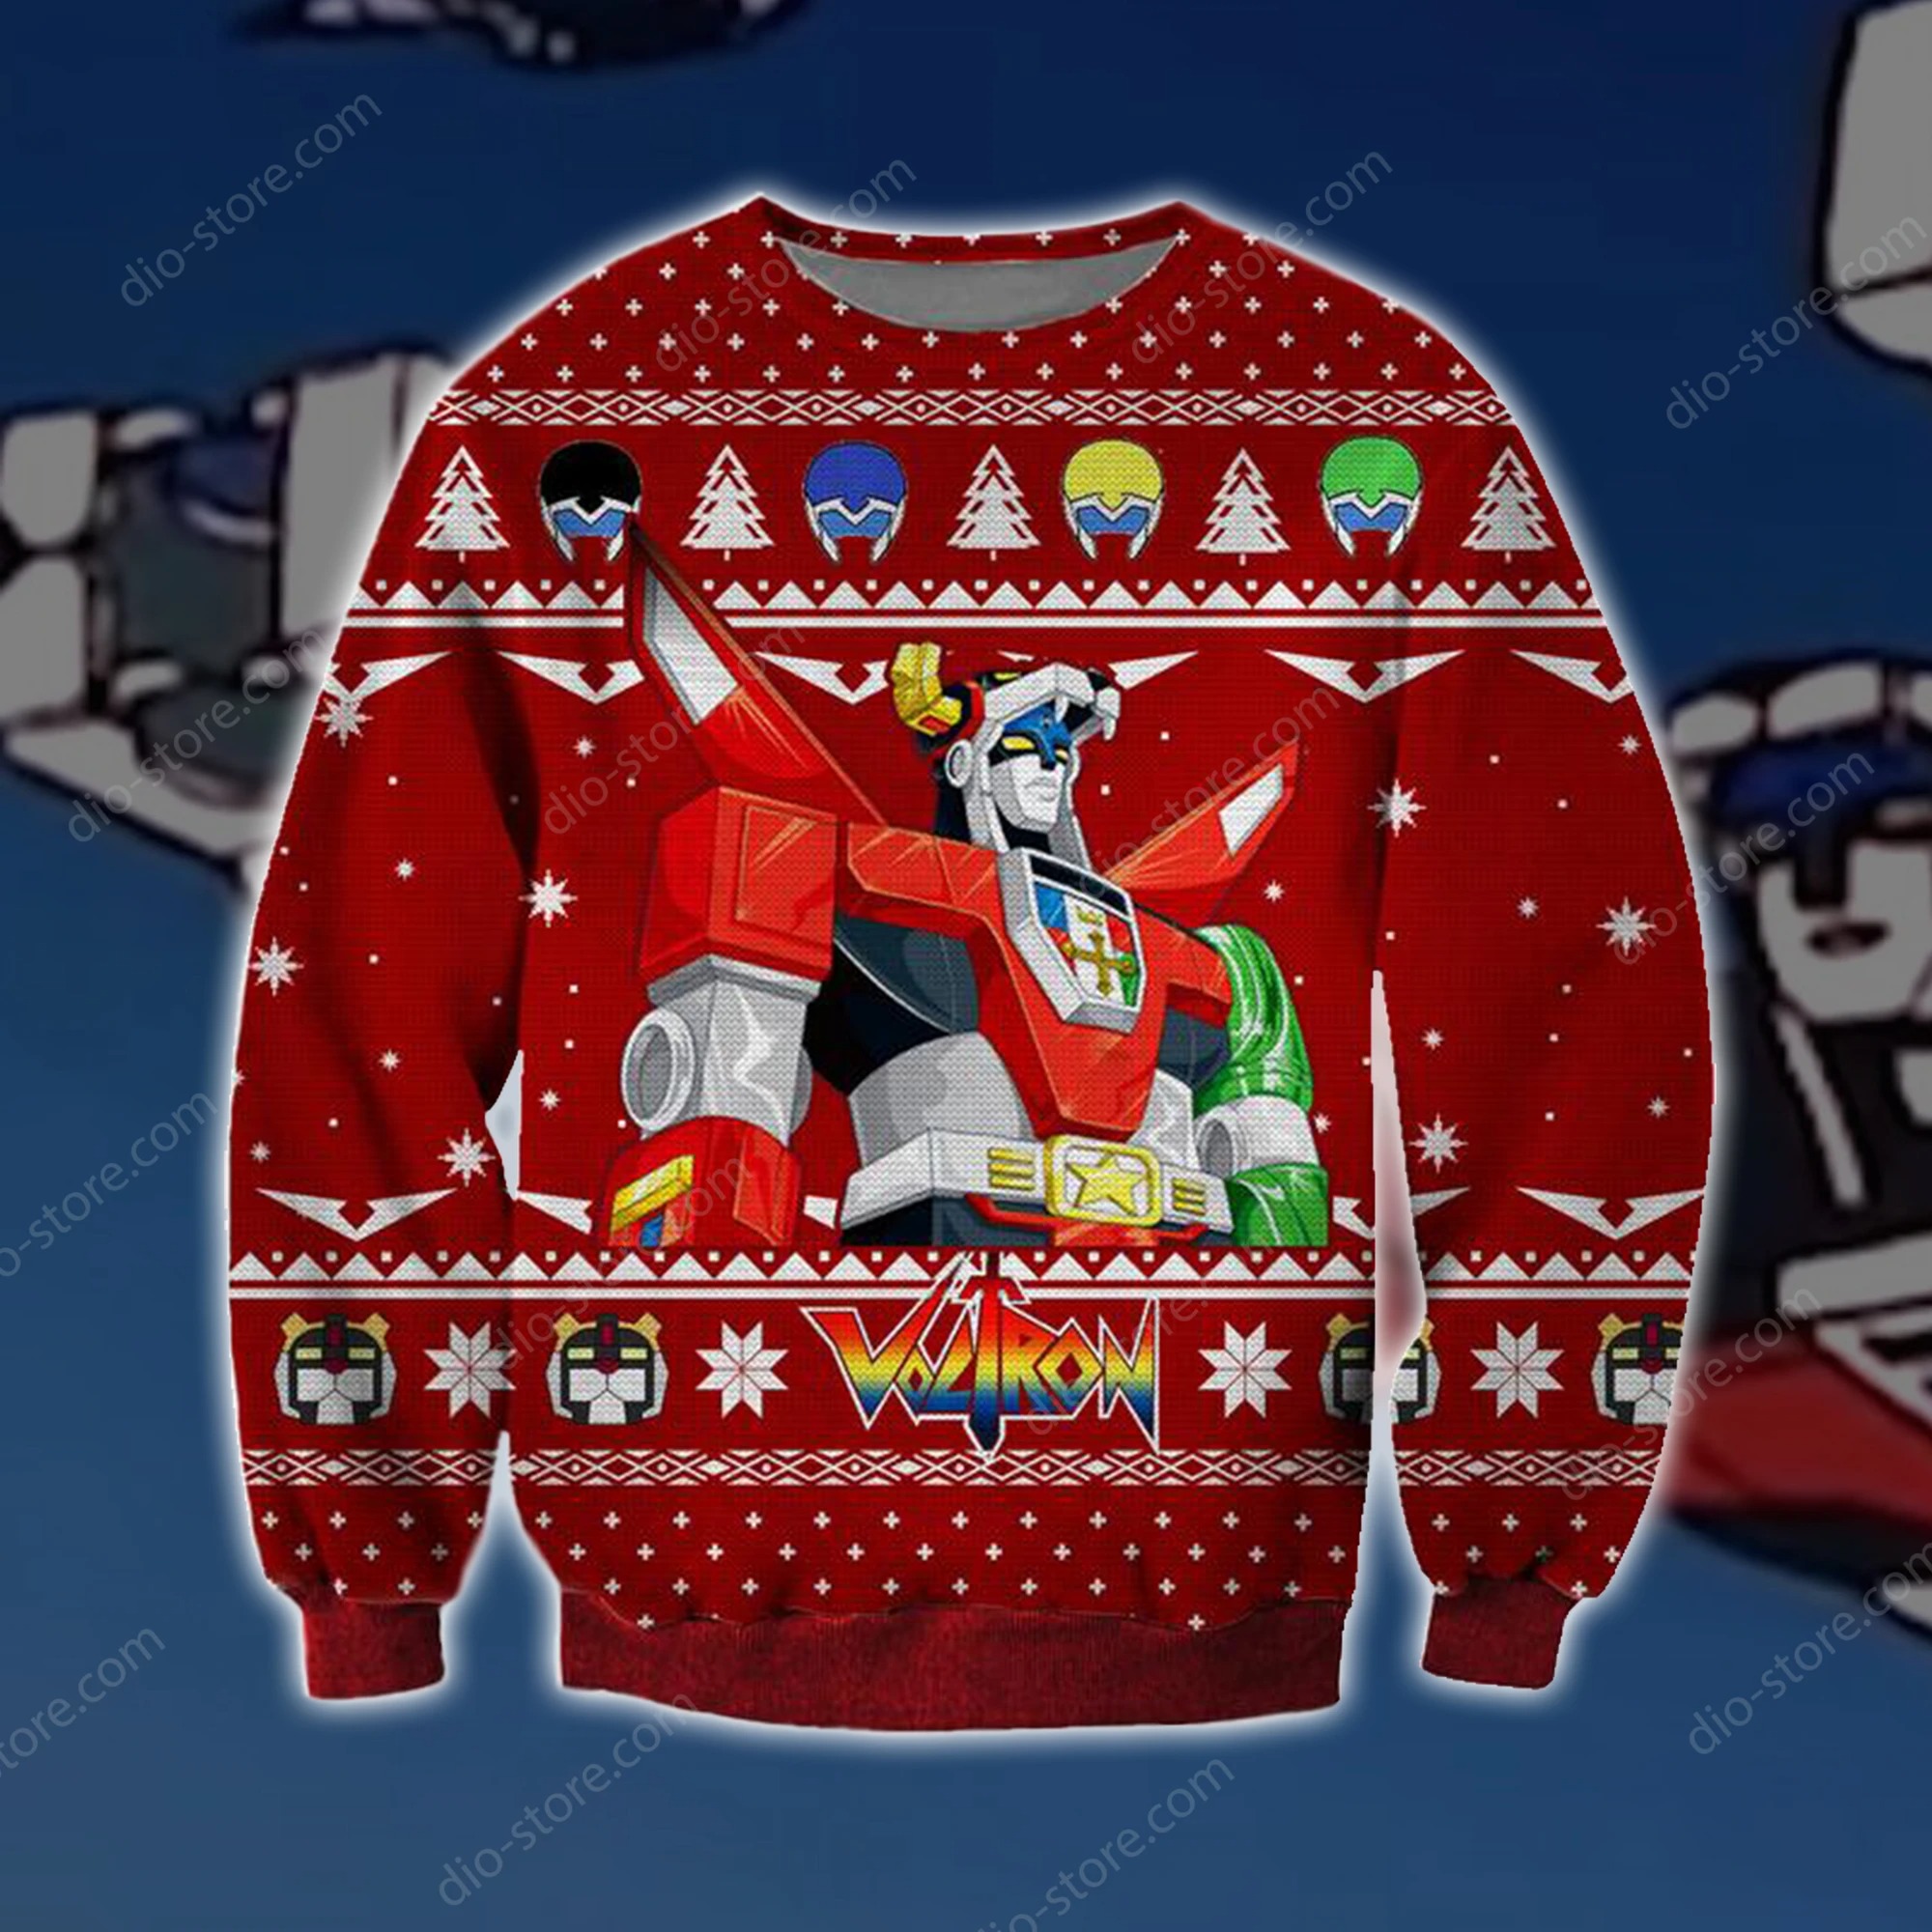 VOLTRON KNITTING PATTERN UGLY SWEATER – LIMITED EDITION